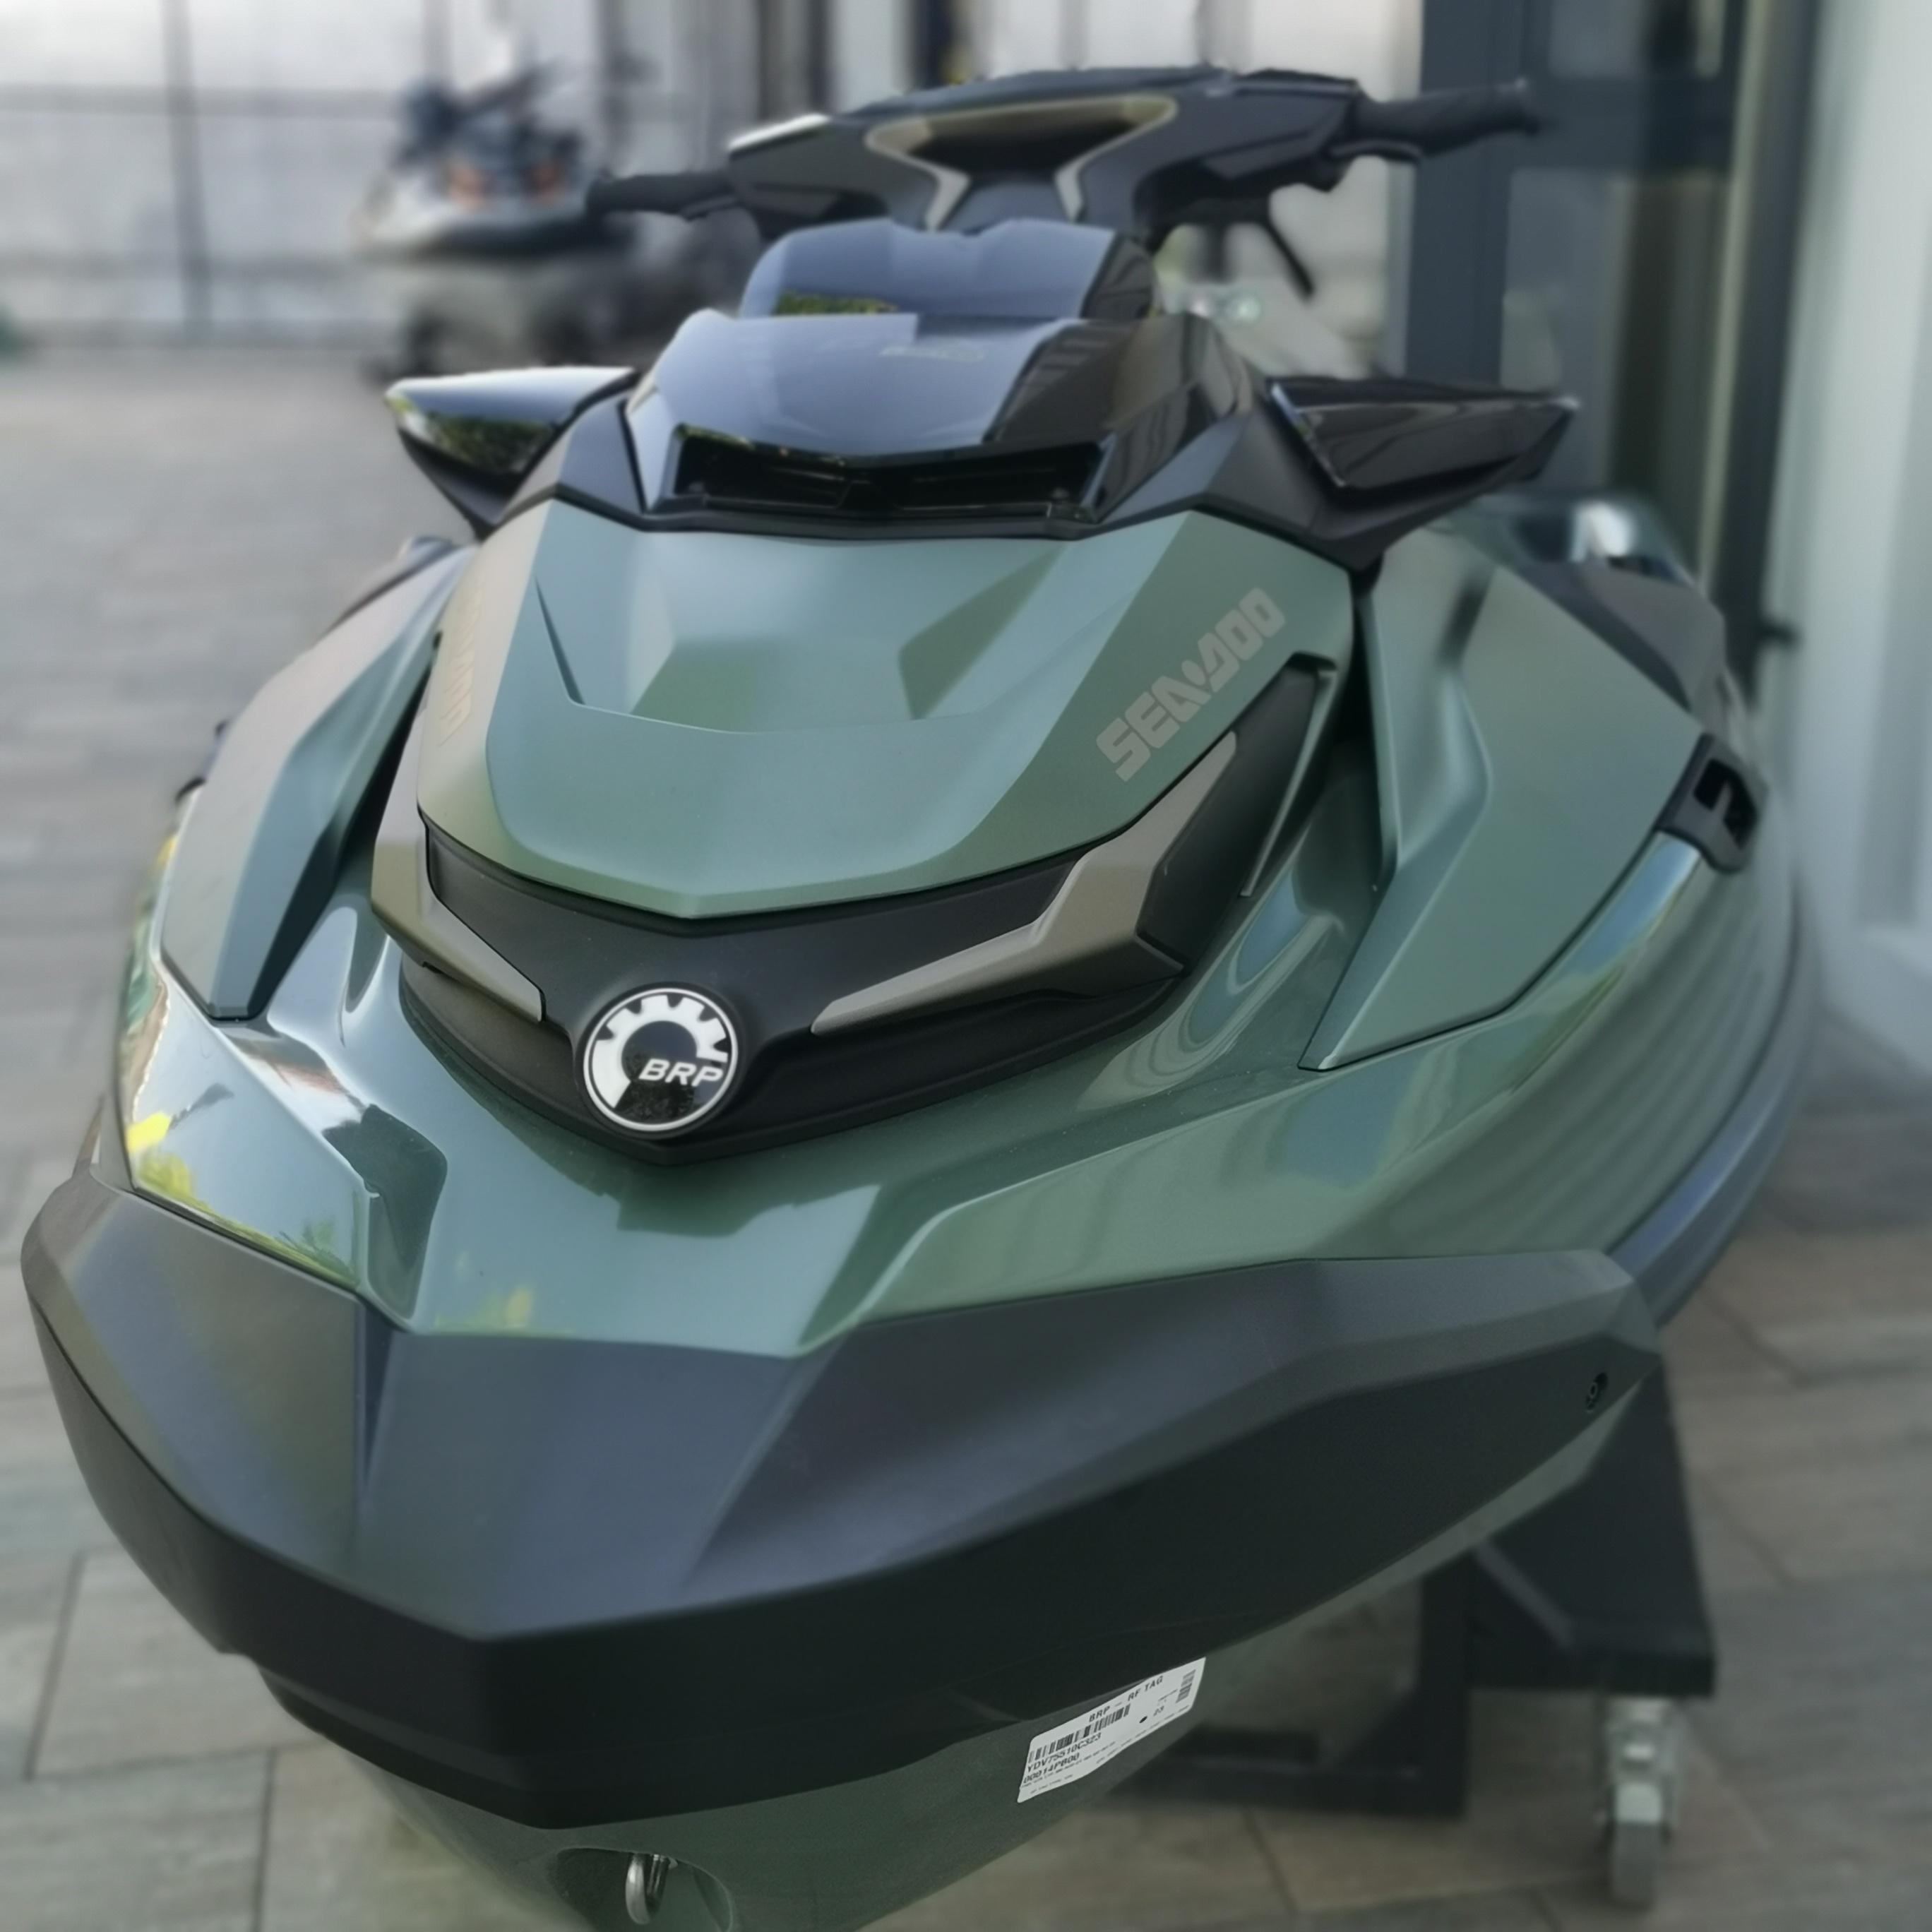 2023 SeaDoo GTX Limited 300 Personal Watercraft for sale YachtWorld